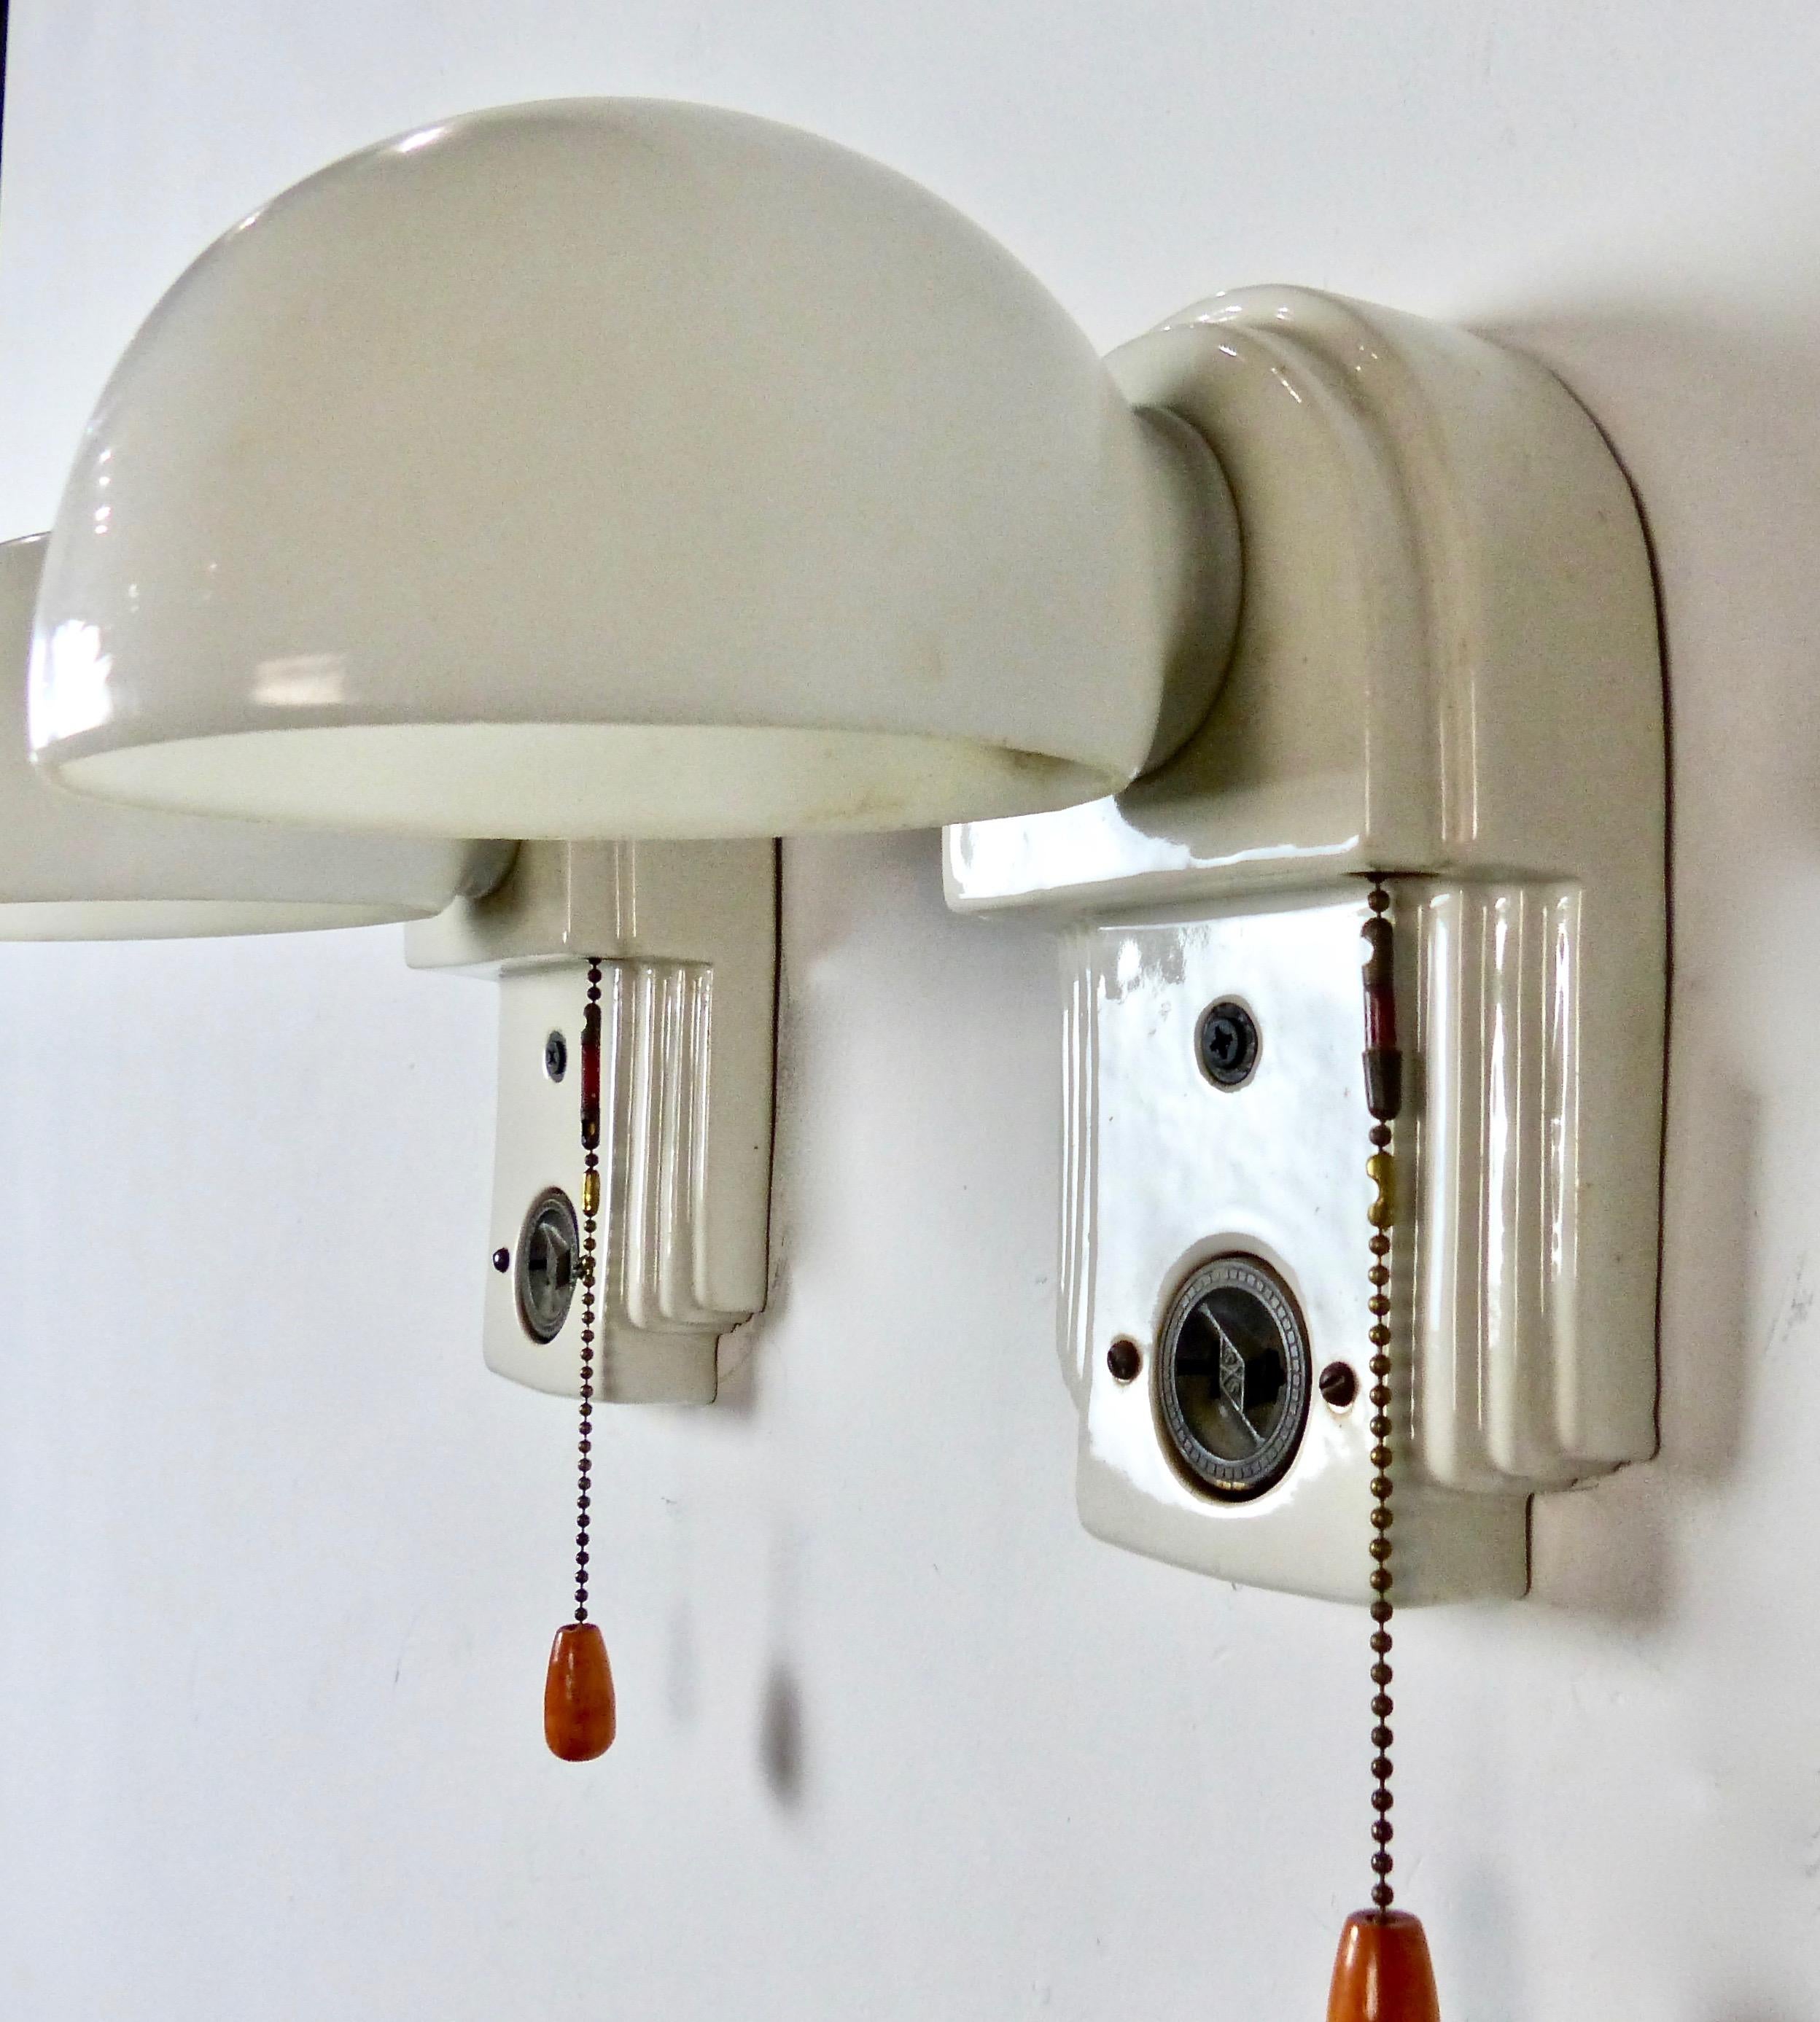 A matched pair of charming white porcelain wall sconces with milk glass shades from circa 1920. Pull-chain on/off switch with wooden knob. Convenient extra electrical outlet incorporated into the design. Re-wired and CSA approved to current